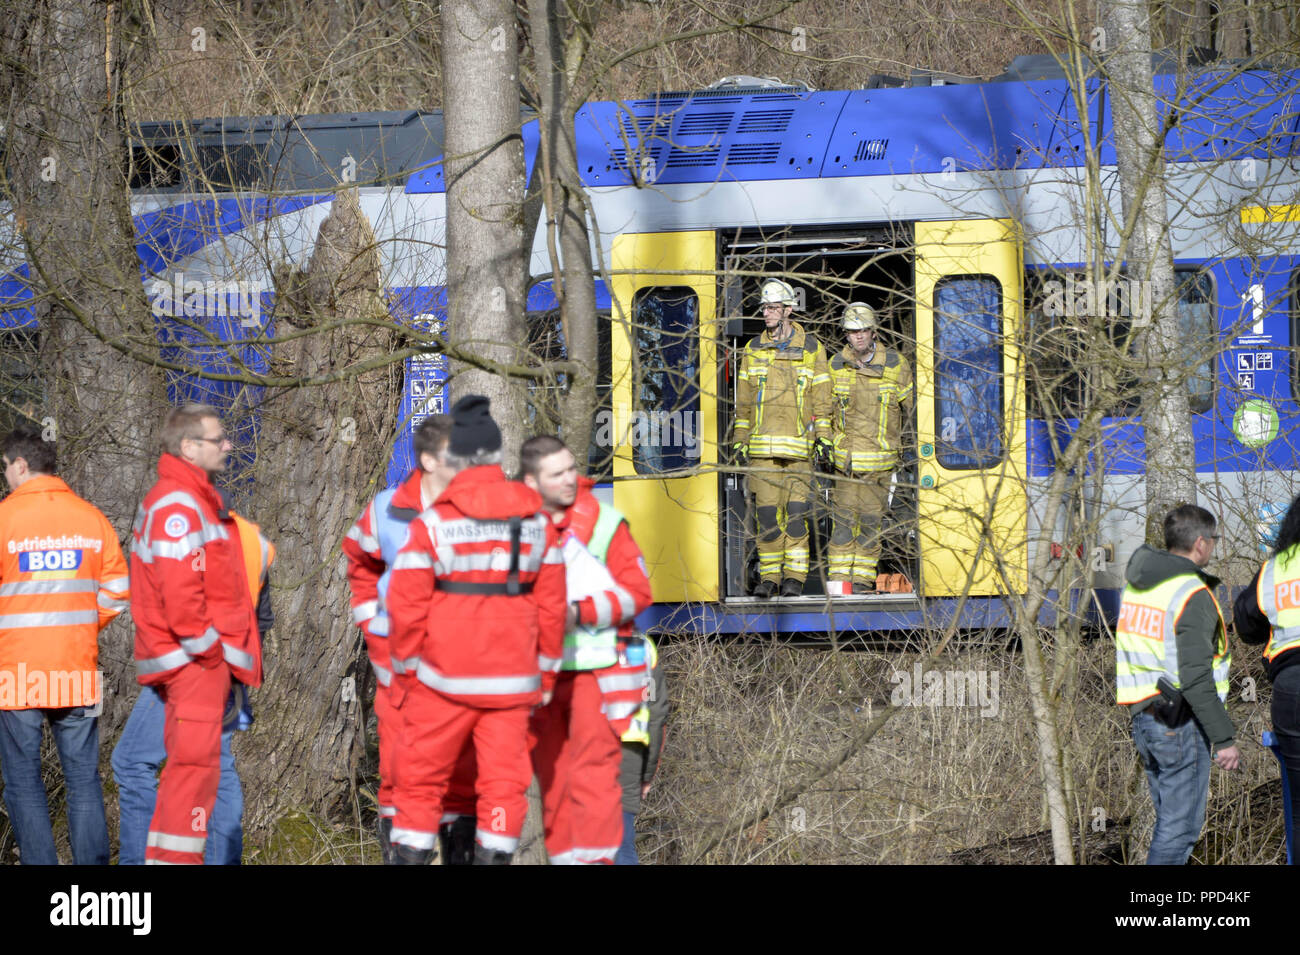 After the frontal collision of two meridian trains at Bad Aibling, rescue workers from the fire brigade, the police, the Bergwacht (mountain rescue service), Wasserwacht (water rescue service), the Red Cross and the Technisches Hilfswerk at the scene of the accident, trying to rescue the injured and salvage the bodies of those killed. Stock Photo